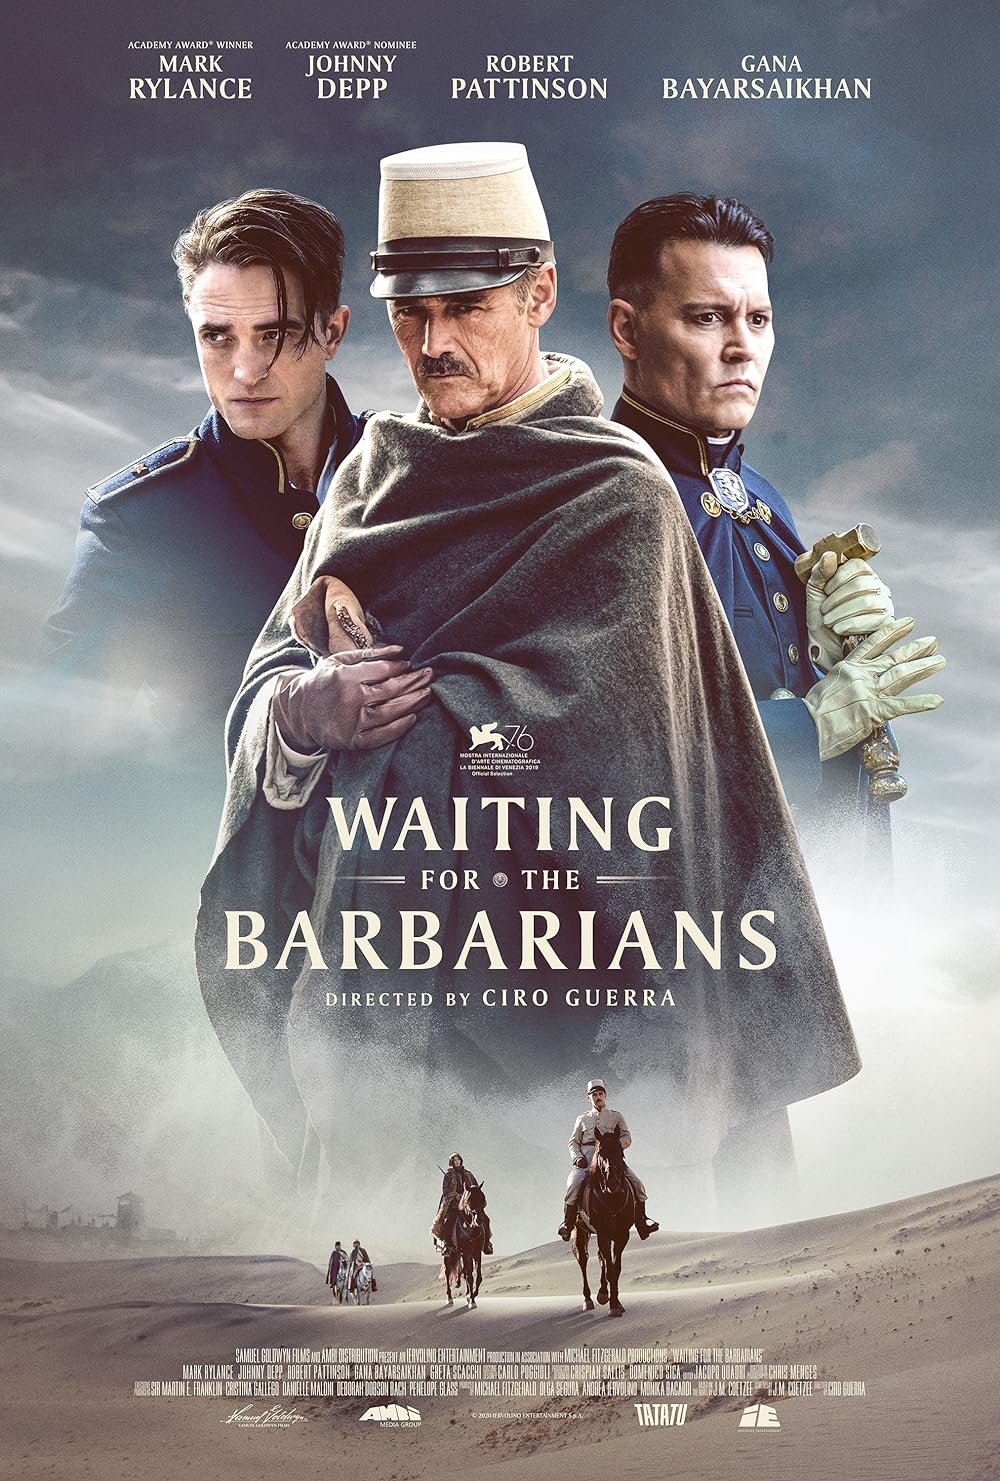 Waiting for the Barbarians (2019) - Score Mixer